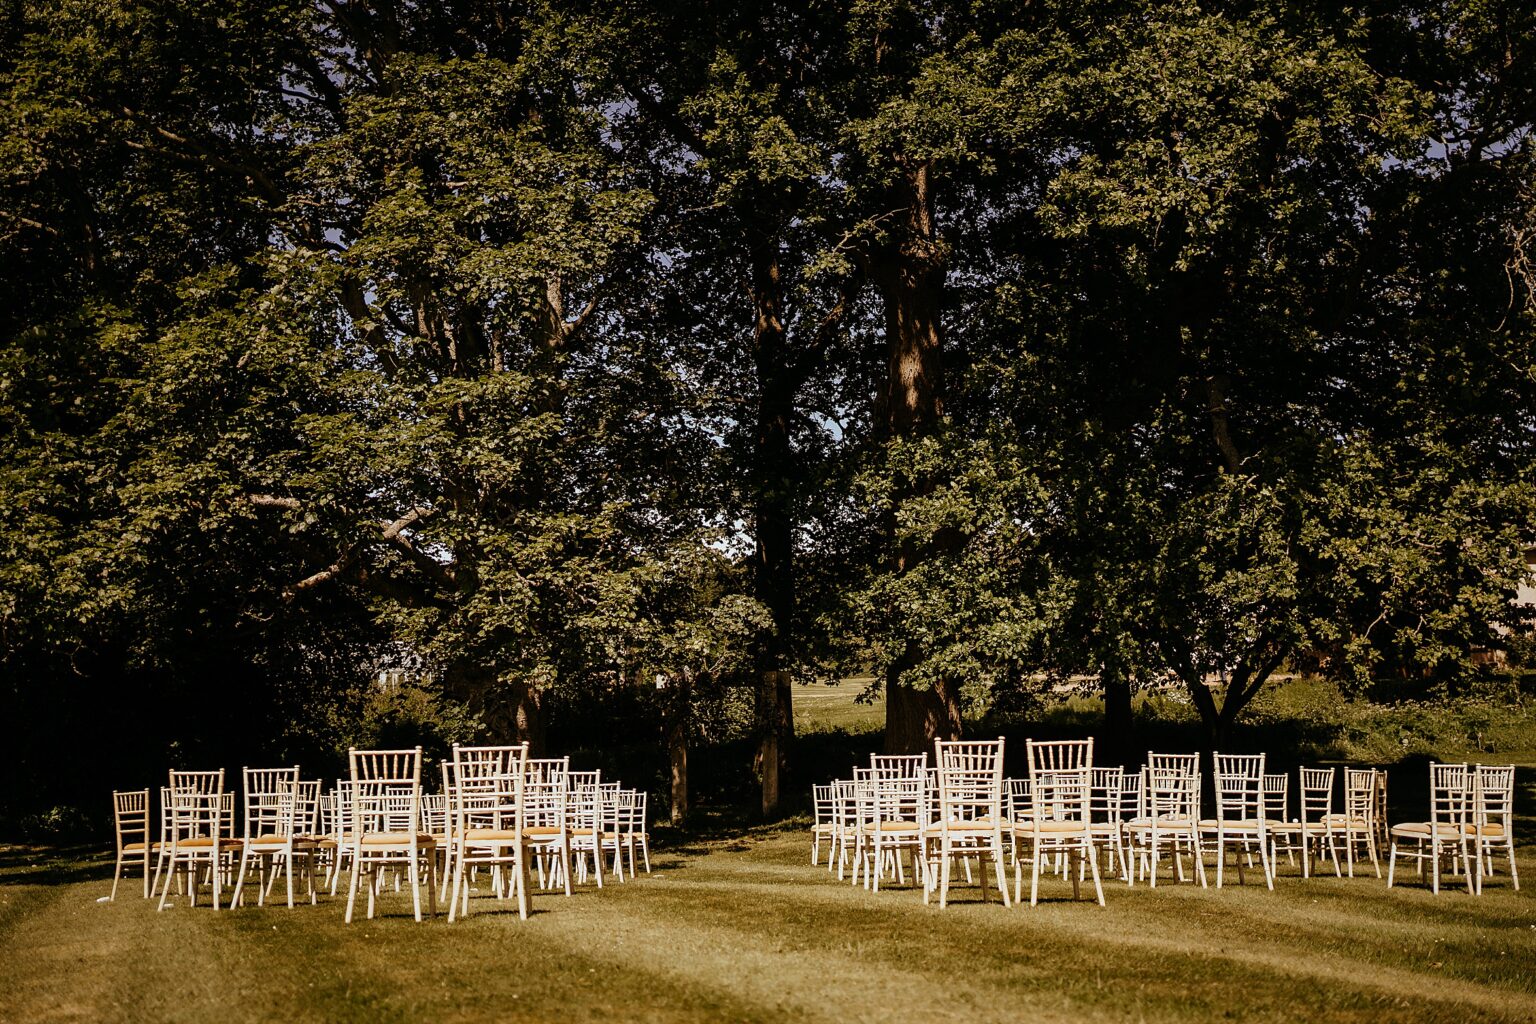 view of cremony location before guests arrive chairs on lawn with big trees in background colstoun house wedding unique wedding venue scotland